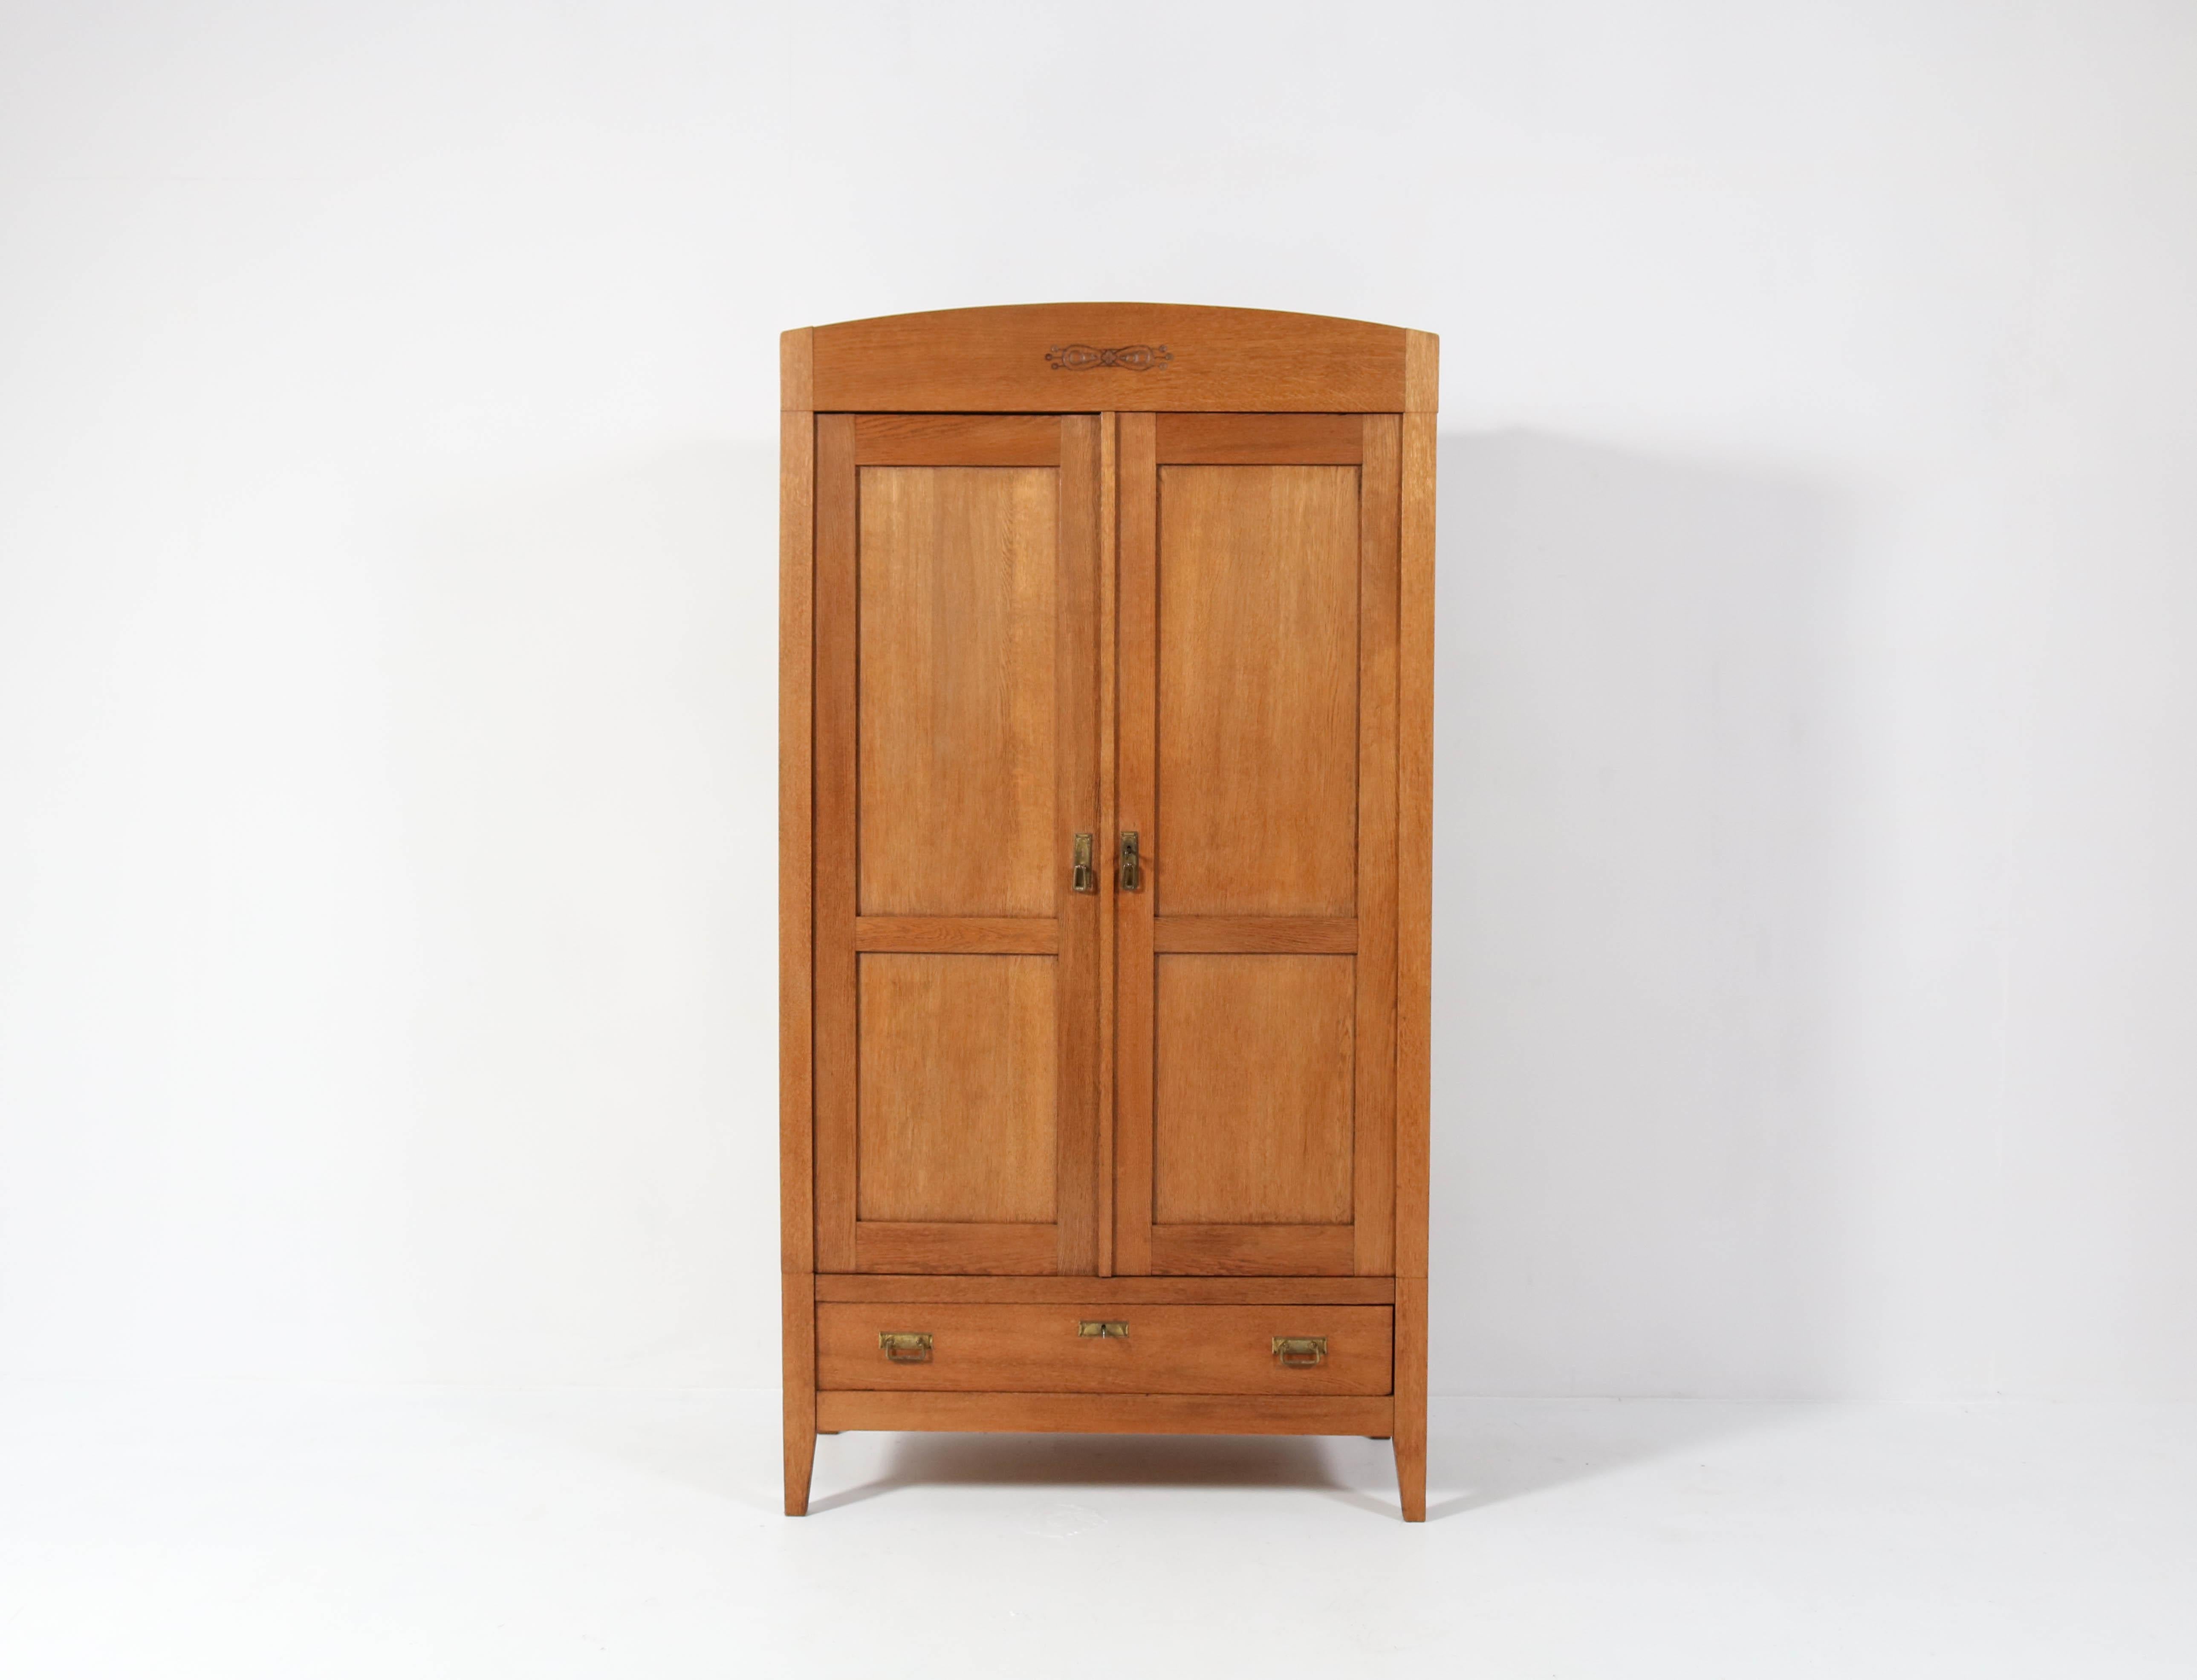 Stunning Art Nouveau Arts & Crafts armoire or wardrobe.
Striking Dutch design from the 1900s.
Solid oak with original brass handles on doors and drawer.
Three original solid oak shelves, one with two drawers adjustable in height.
This wonderful